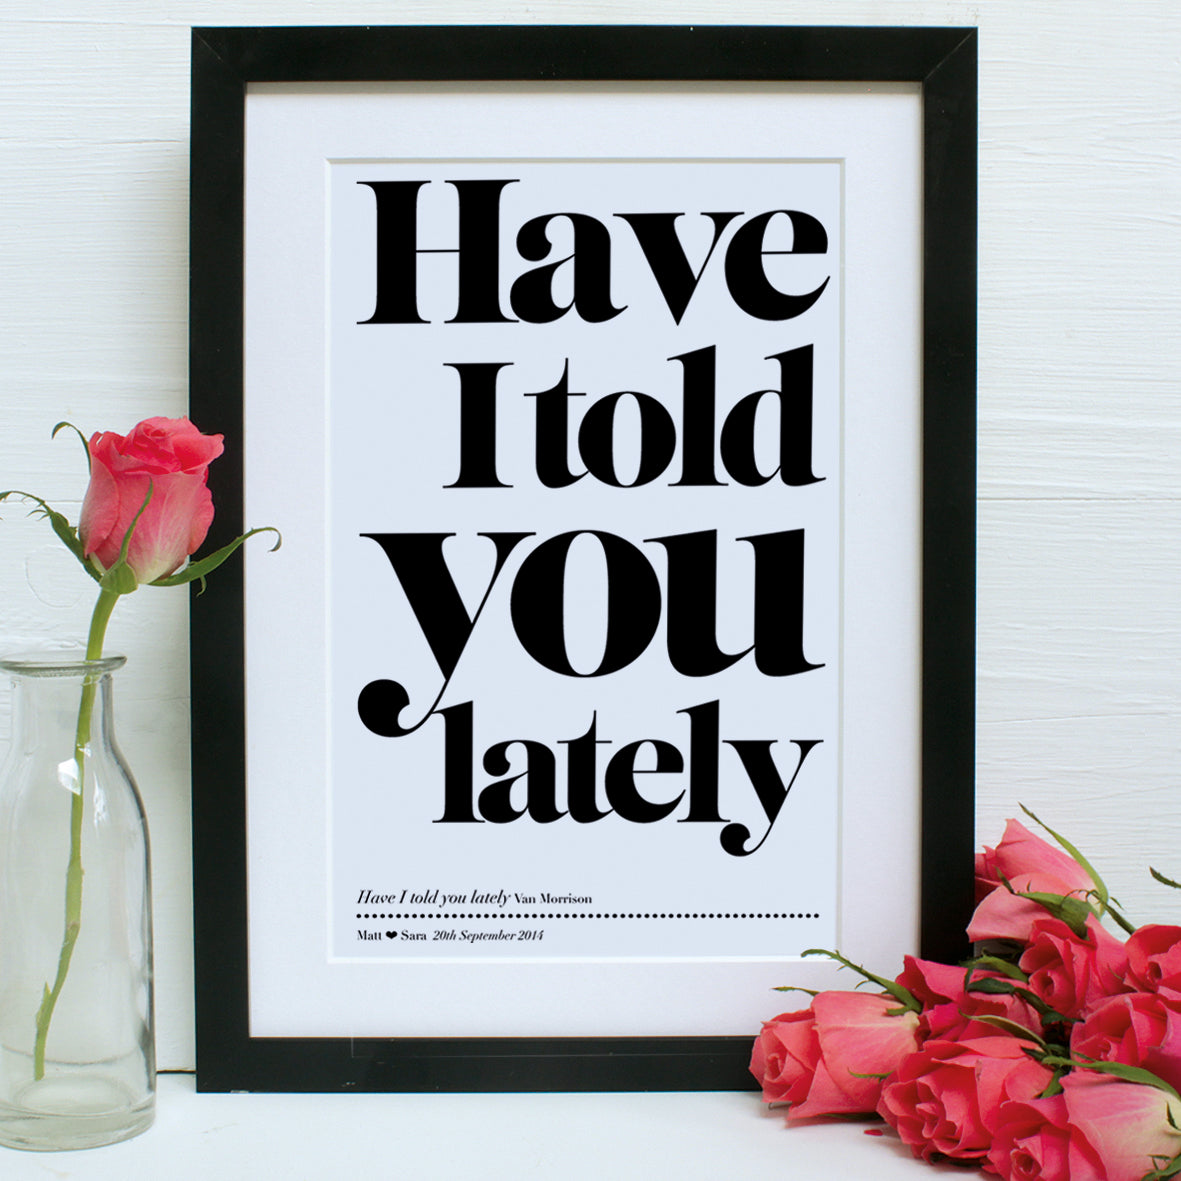 Personalised Our Favourite Song Framed Print